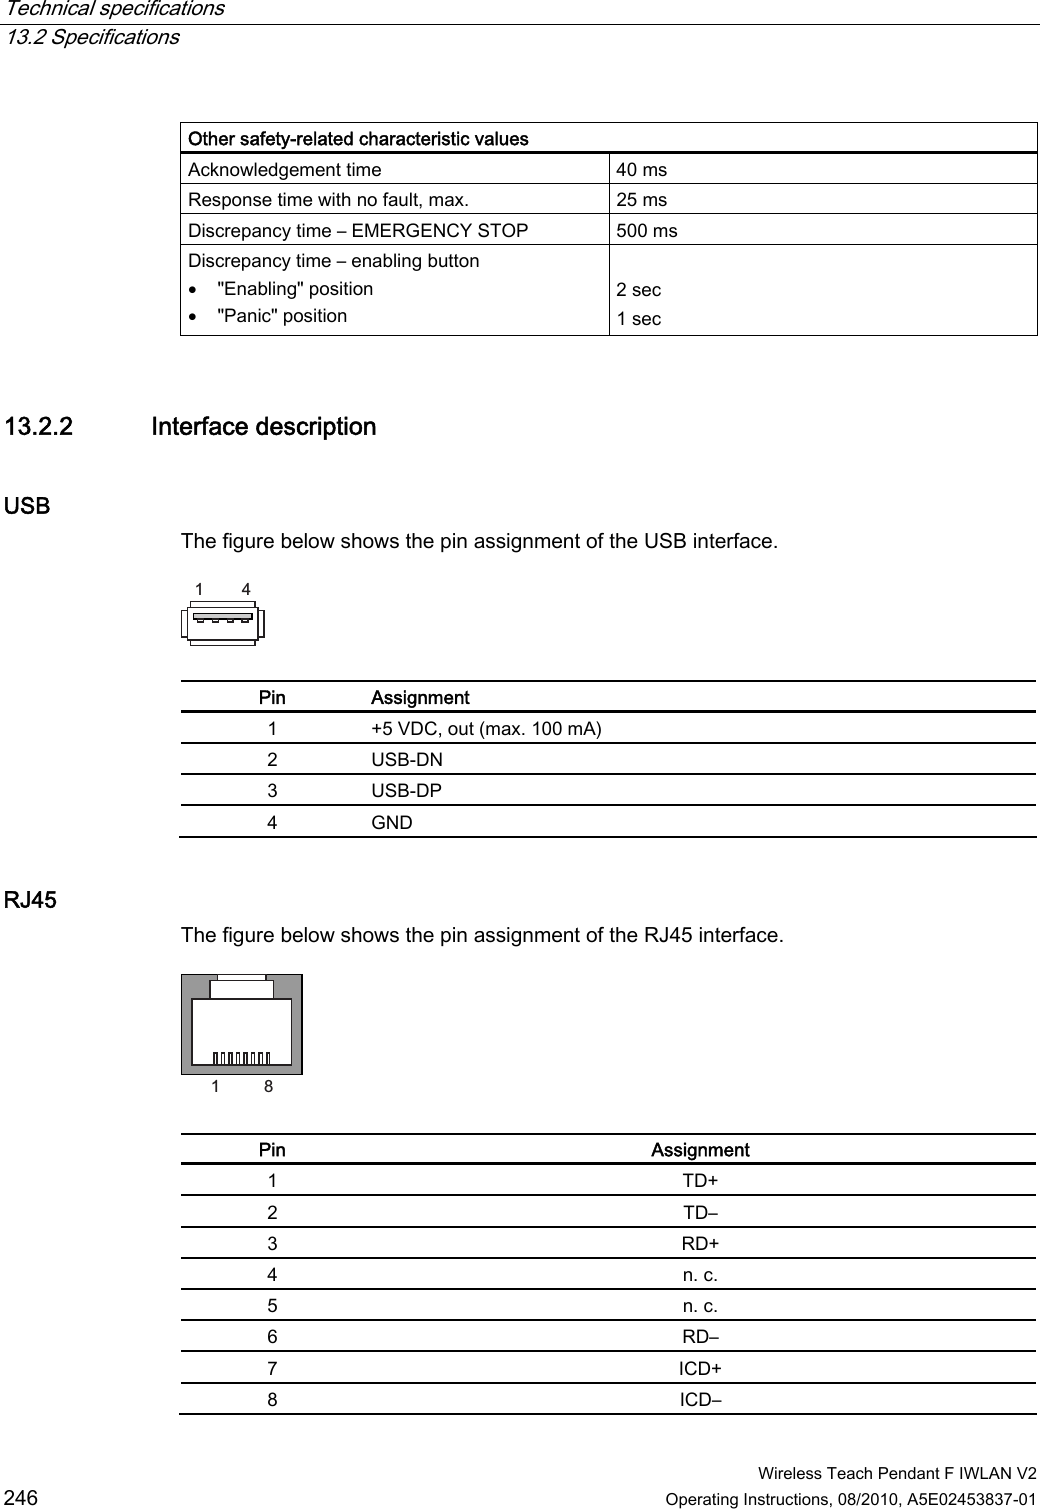 Technical specifications   13.2 Specifications  Wireless Teach Pendant F IWLAN V2 246 Operating Instructions, 08/2010, A5E02453837-01  Other safety-related characteristic values Acknowledgement time  40 ms Response time with no fault, max.  25 ms Discrepancy time – EMERGENCY STOP  500 ms Discrepancy time – enabling button  &quot;Enabling&quot; position  &quot;Panic&quot; position  2 sec 1 sec 13.2.2 Interface description USB  The figure below shows the pin assignment of the USB interface.   Pin  Assignment 1  +5 VDC, out (max. 100 mA) 2  USB-DN 3  USB-DP 4  GND RJ45  The figure below shows the pin assignment of the RJ45 interface.   Pin  Assignment 1  TD+ 2  TD– 3  RD+ 4  n. c. 5  n. c. 6  RD– 7  ICD+ 8  ICD– PRELIMINARY II 1.7.2010